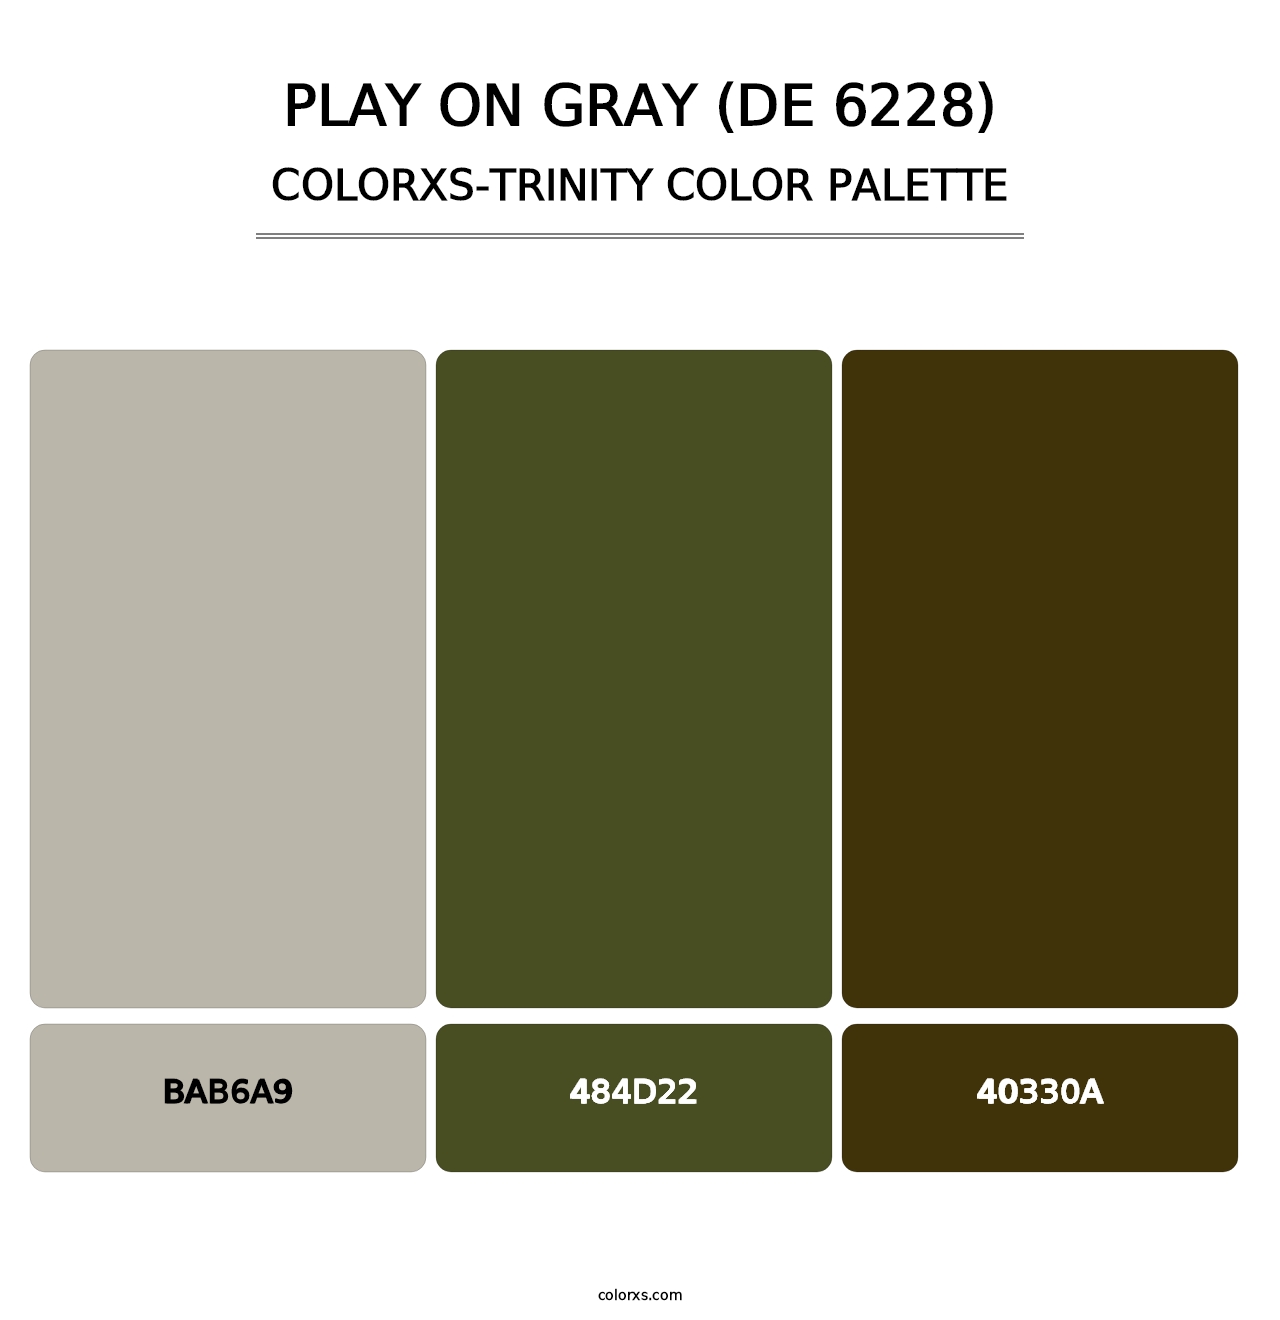 Play on Gray (DE 6228) - Colorxs Trinity Palette